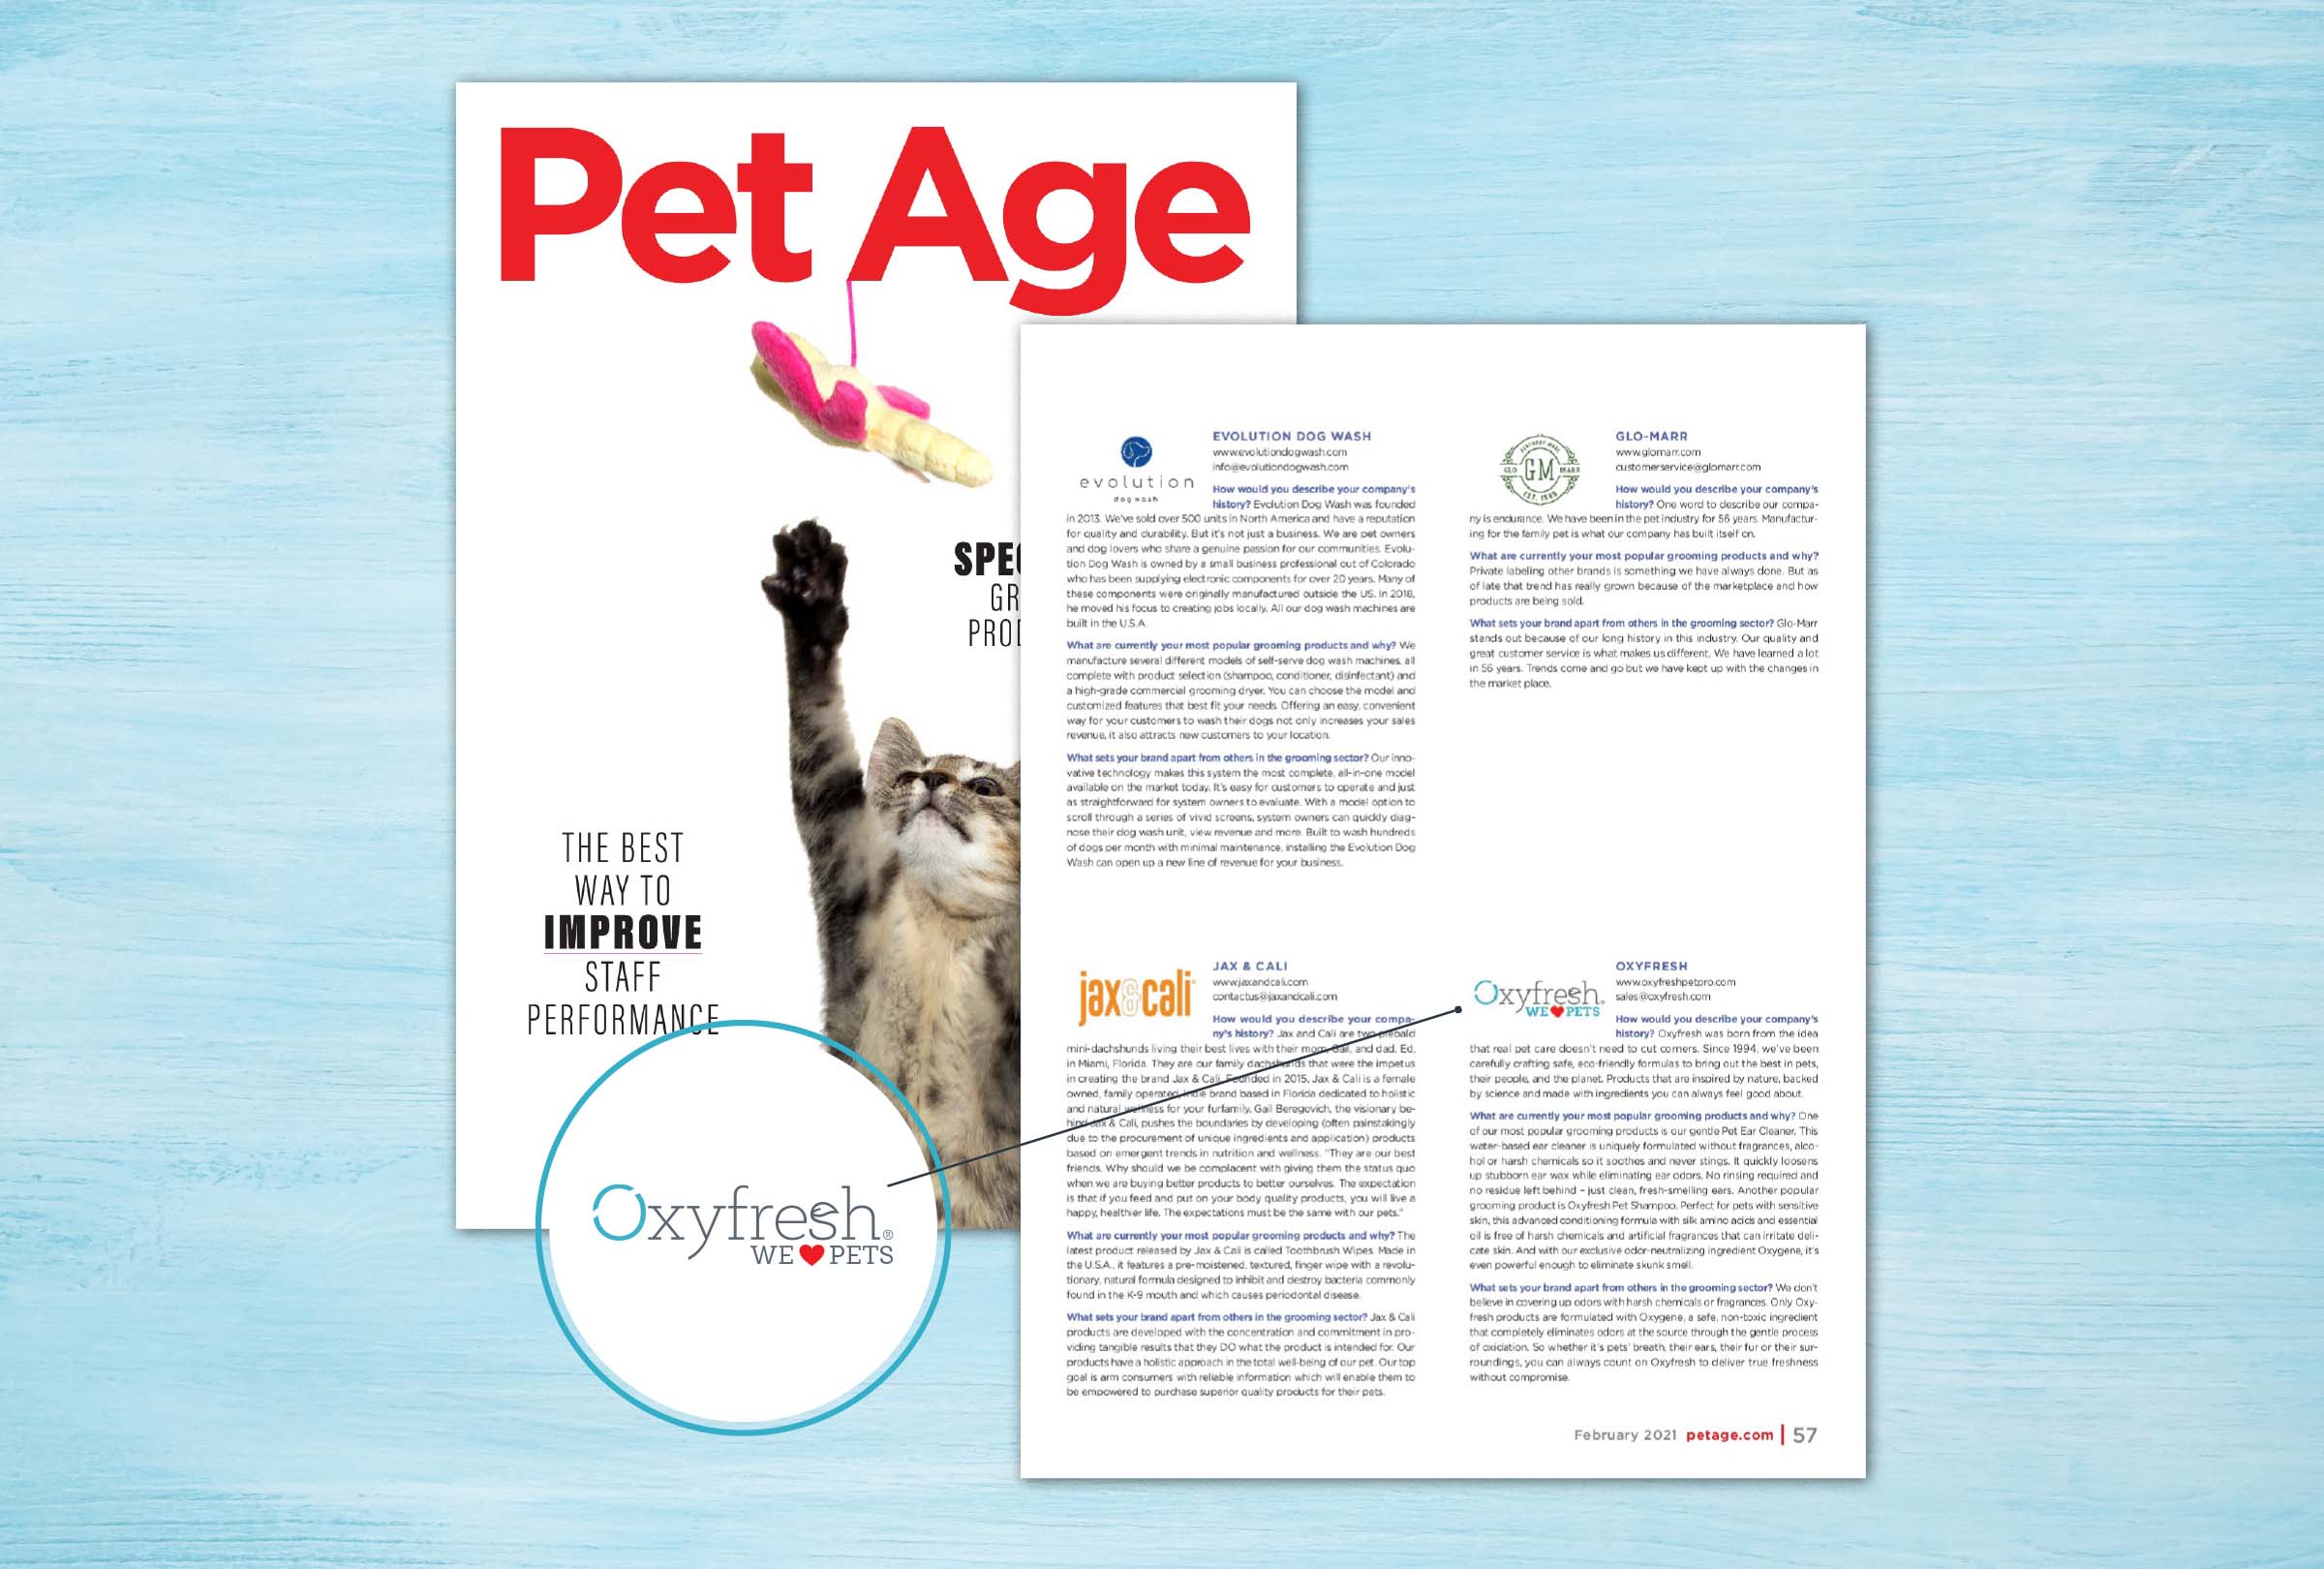 Oxyfresh Brand Profile Featured in February 2021 Issue of Pet Age